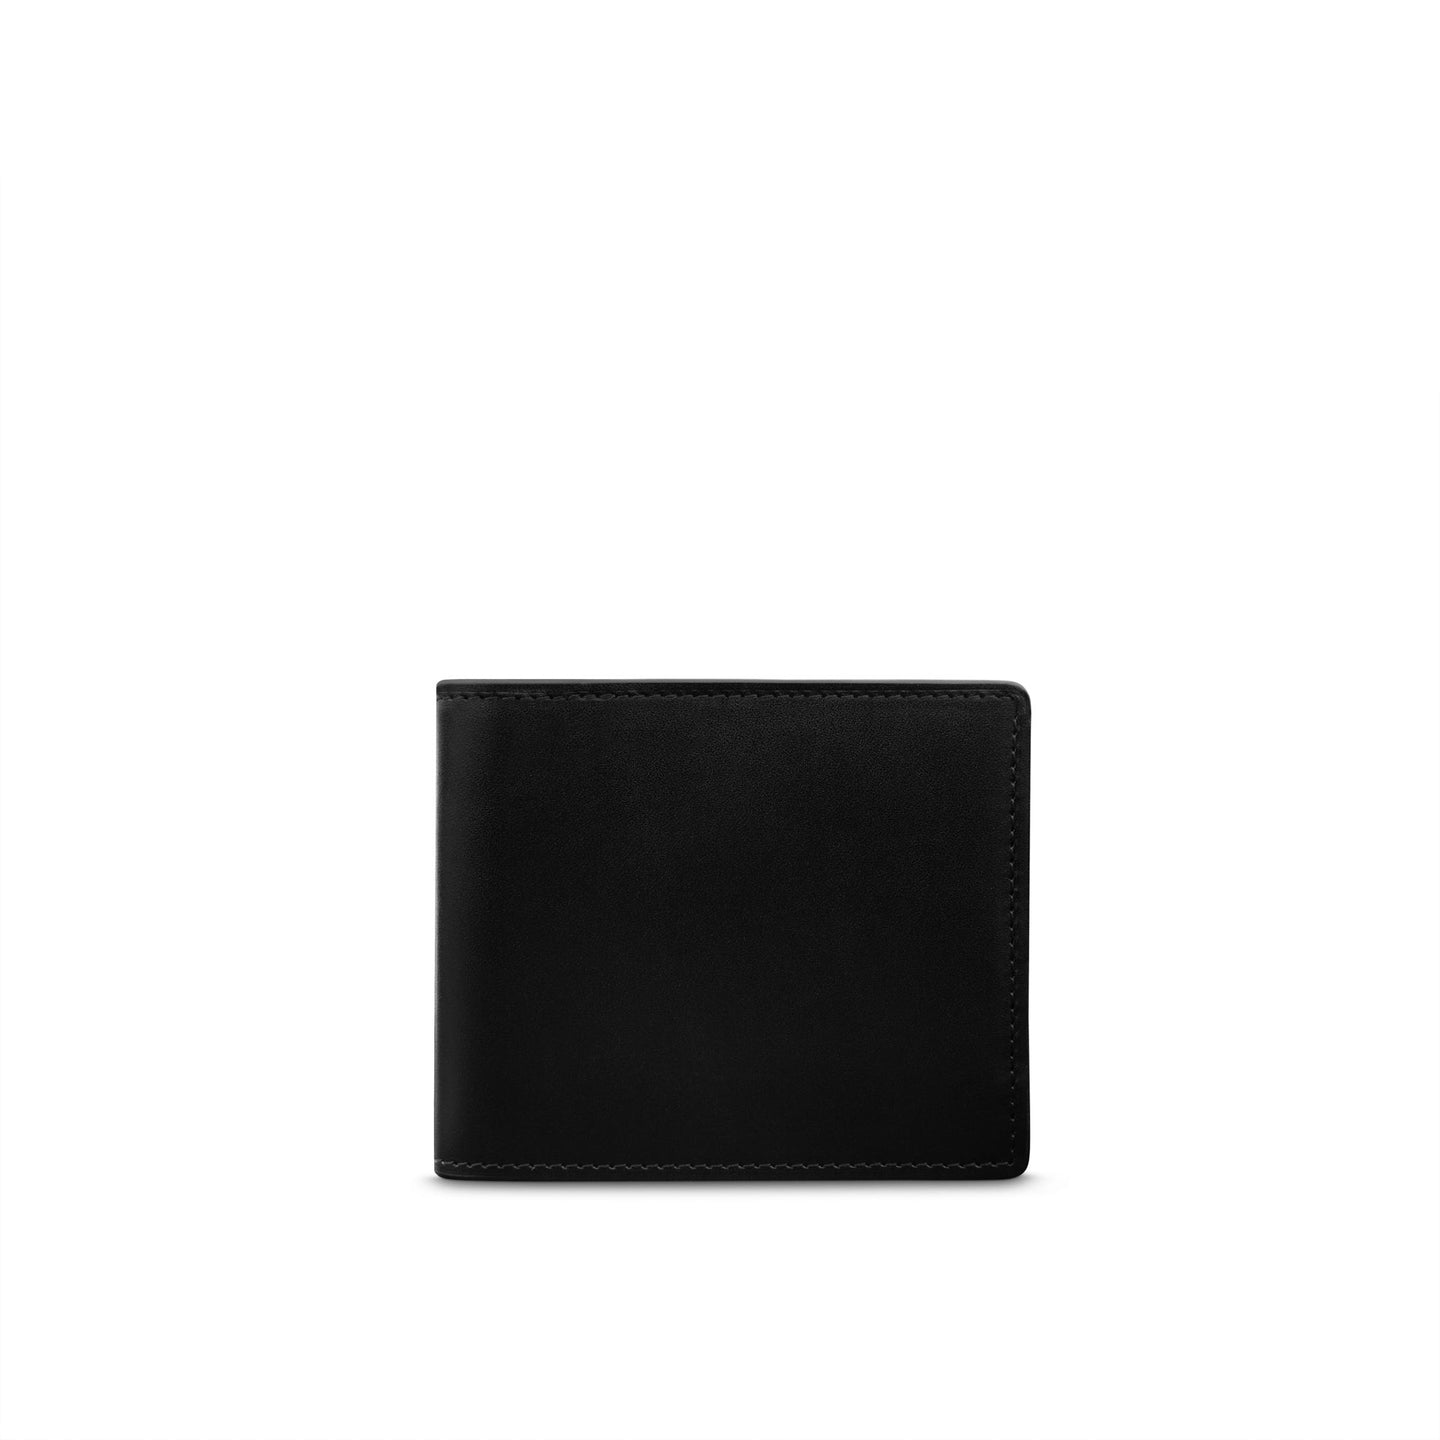 Hanover 6cc Billfold Wallet in Saddle Leather